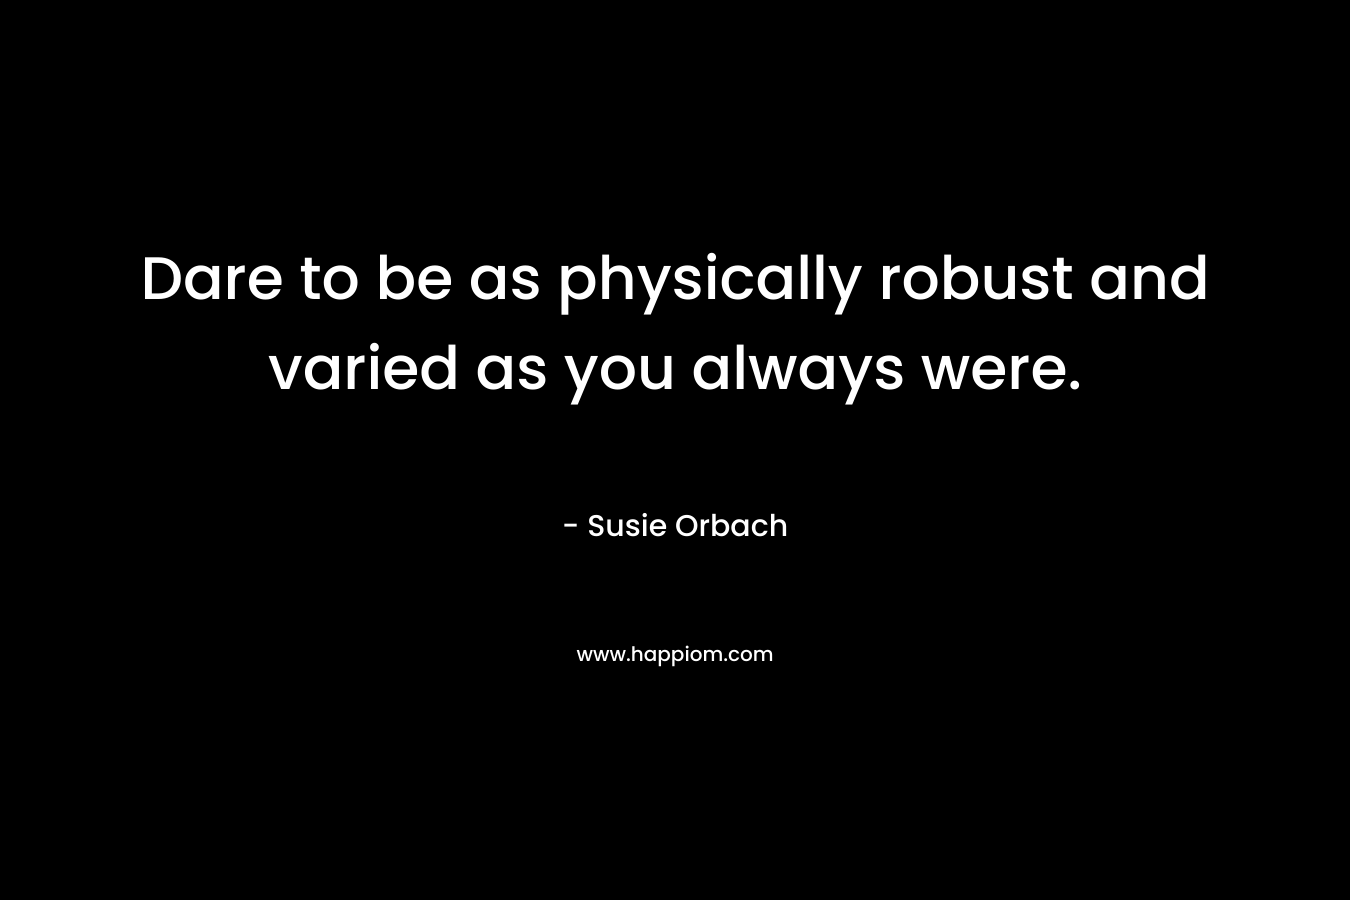 Dare to be as physically robust and varied as you always were. – Susie Orbach